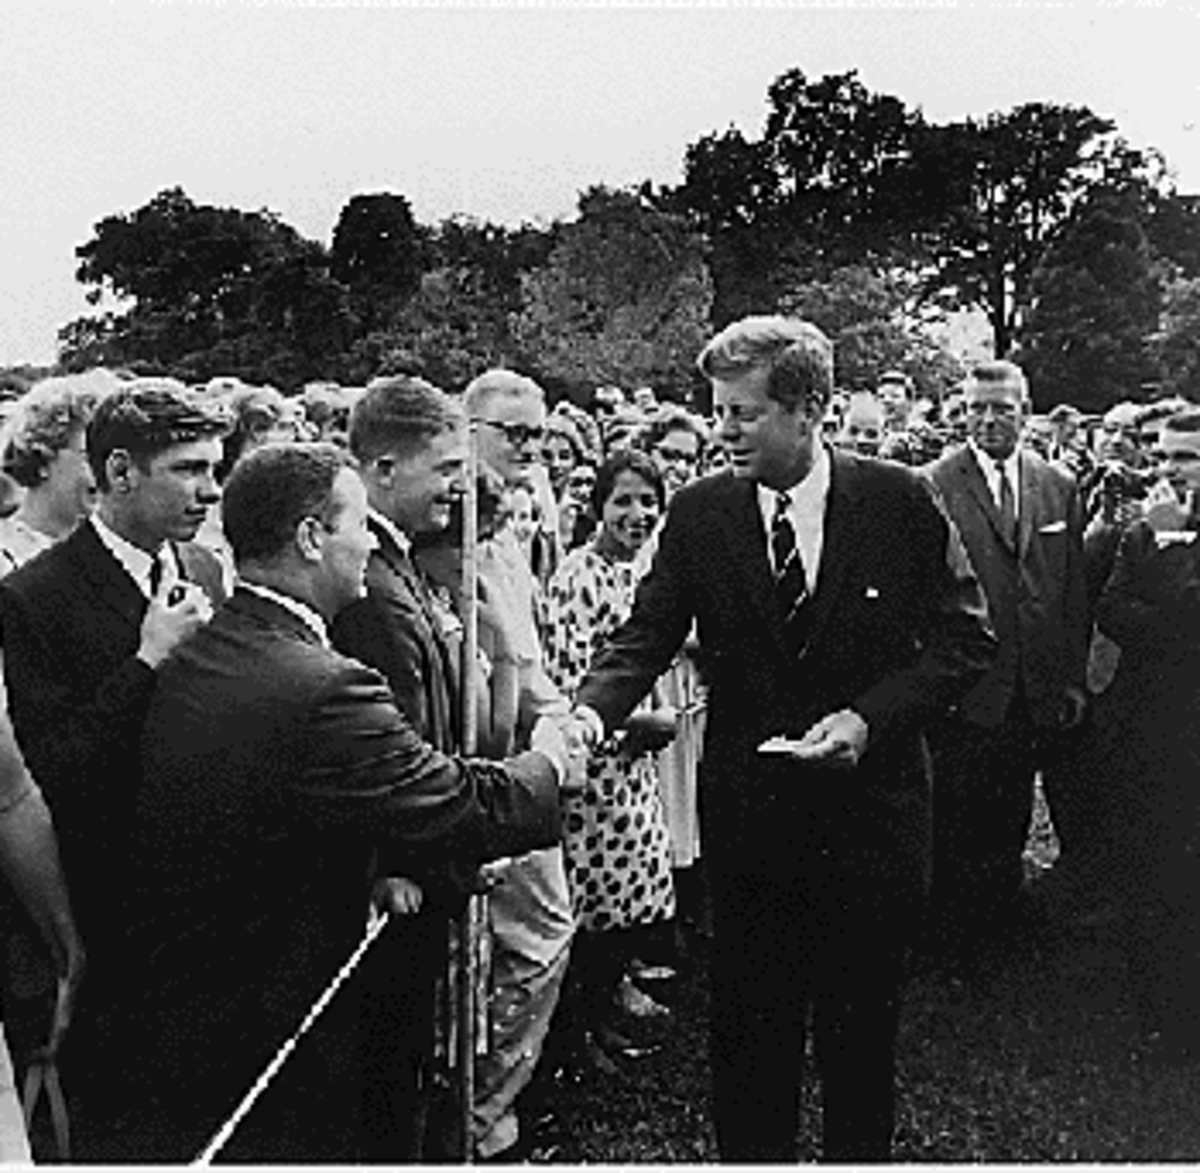 President John F. Kennedy urging University of Michigan students to support and join the Peace Corp in 1960.